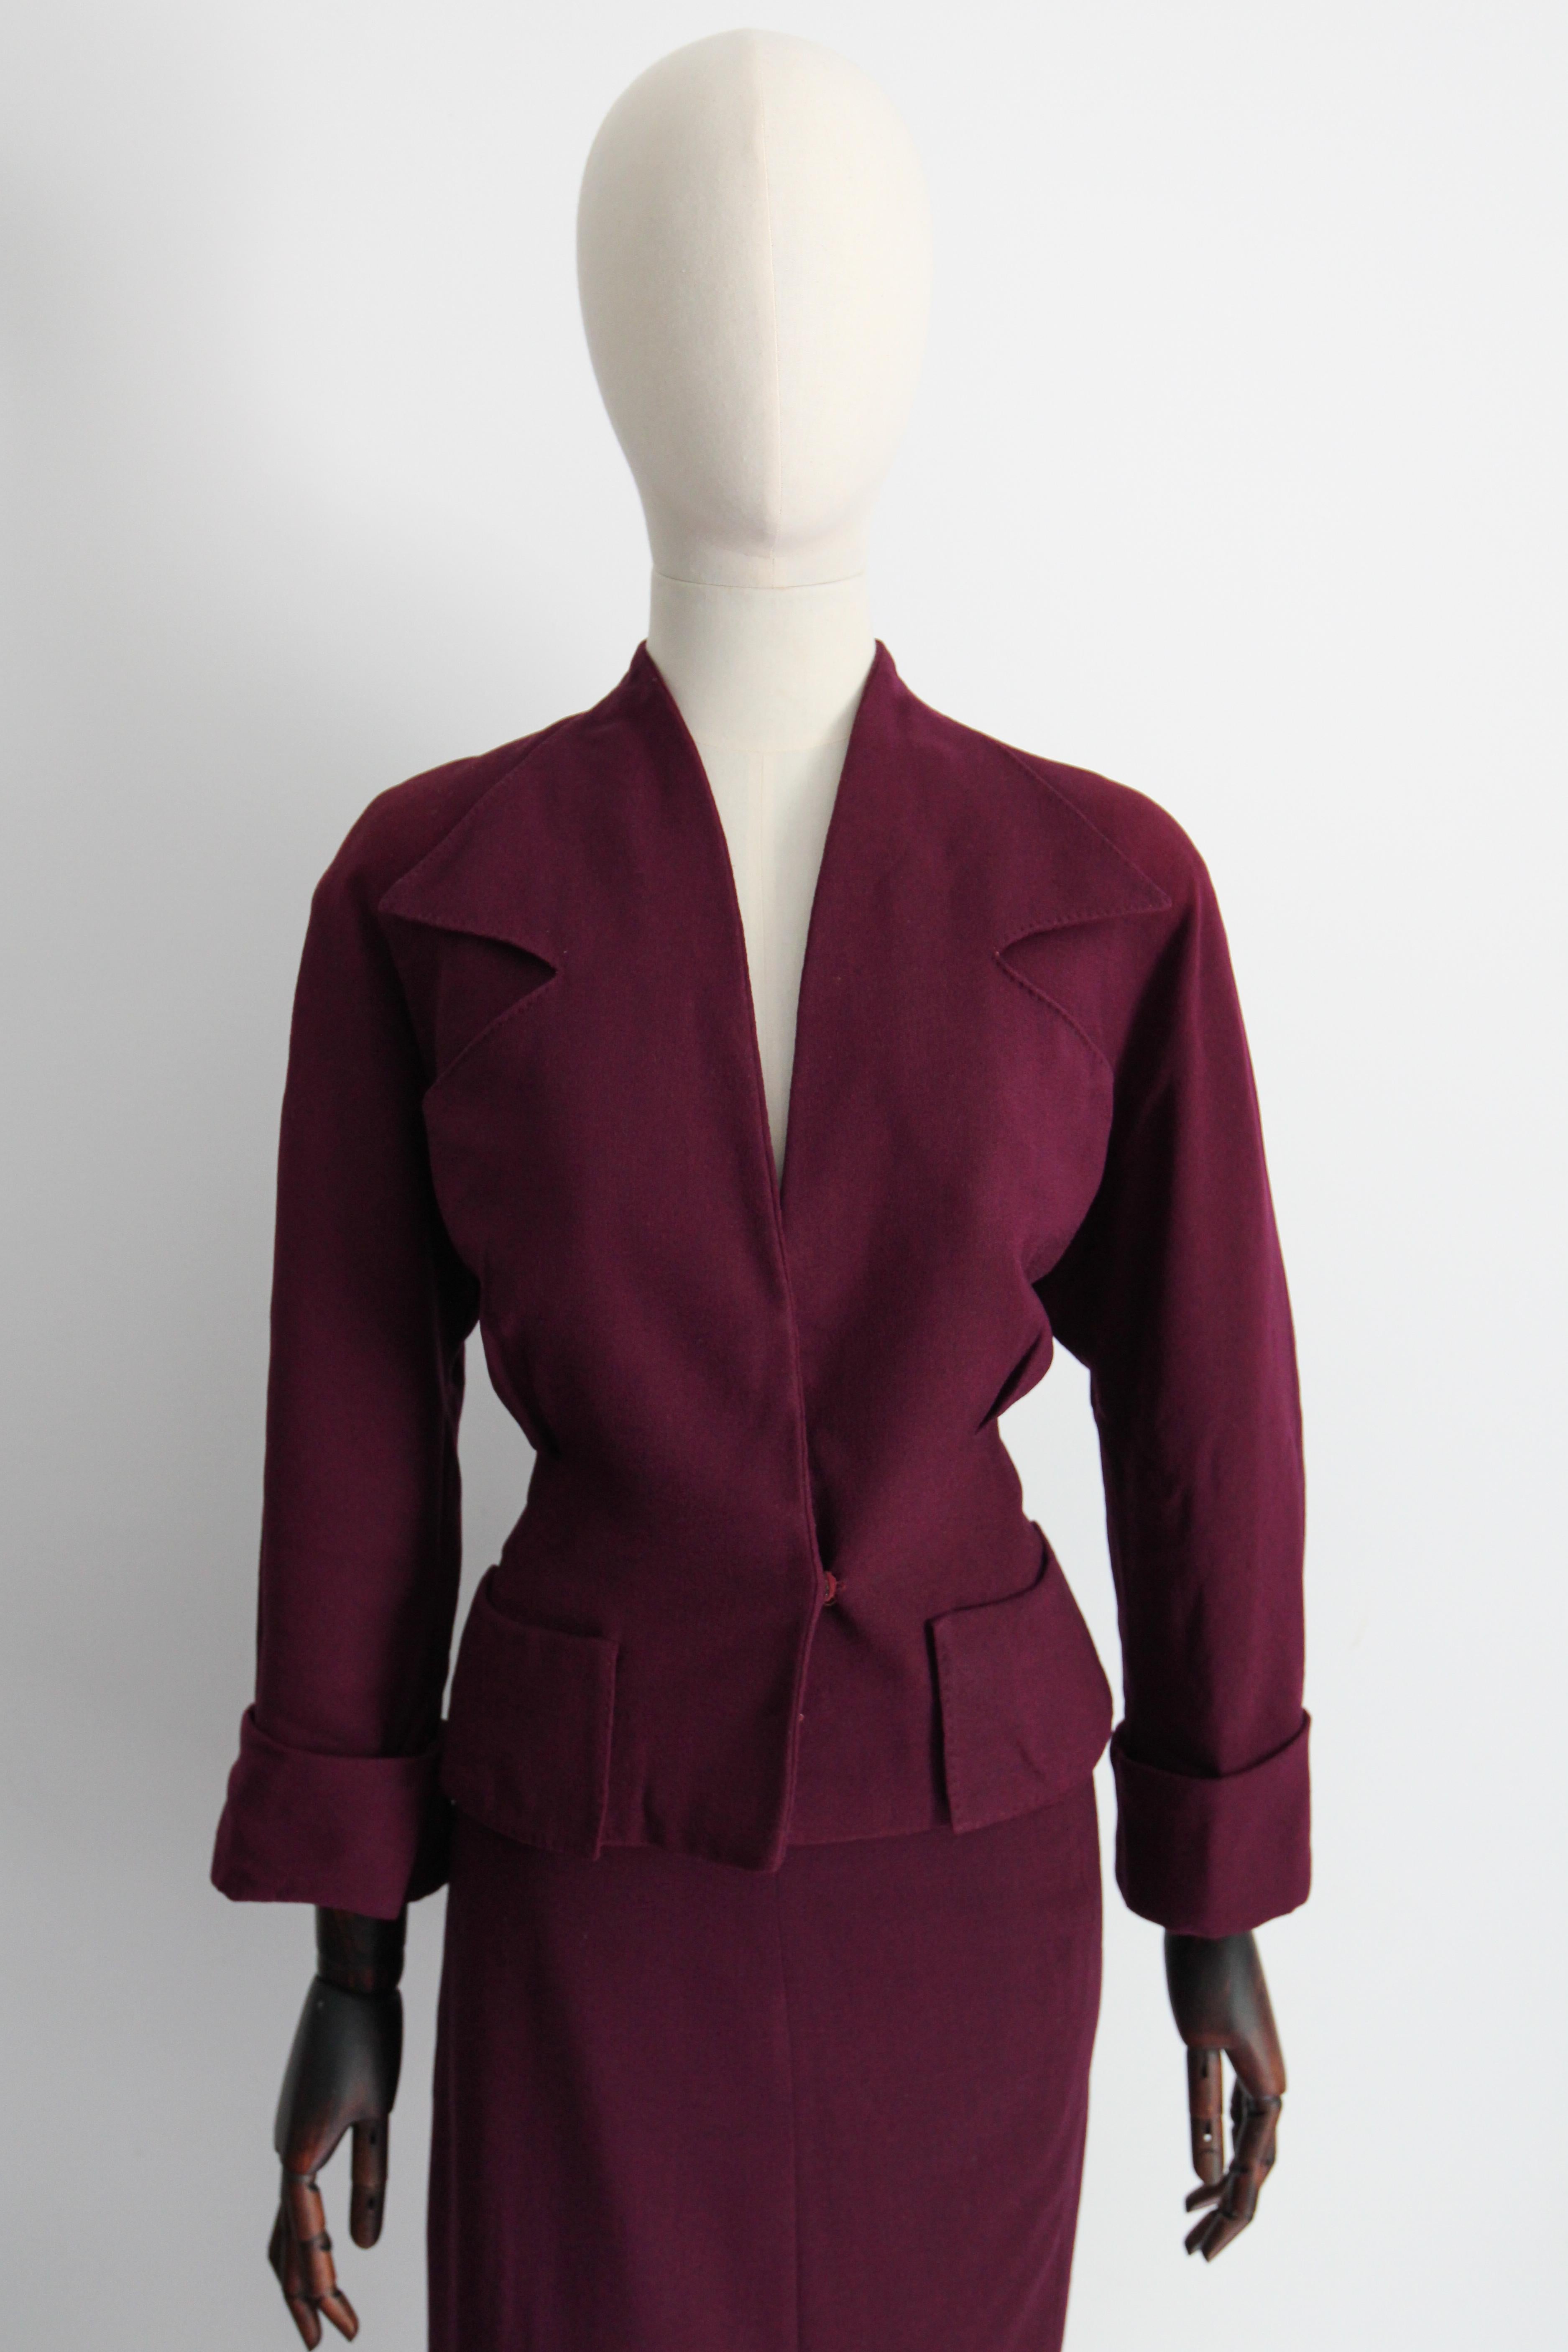 Rendered in the deepest shade of plum in a wonderful crepe wool weave, this original 1940's skirt suit, is just the perfect ensemble for your tailored wardrobe.

The deep V shaped neckline of the jacket, is framed by wide pointed notched lapels,